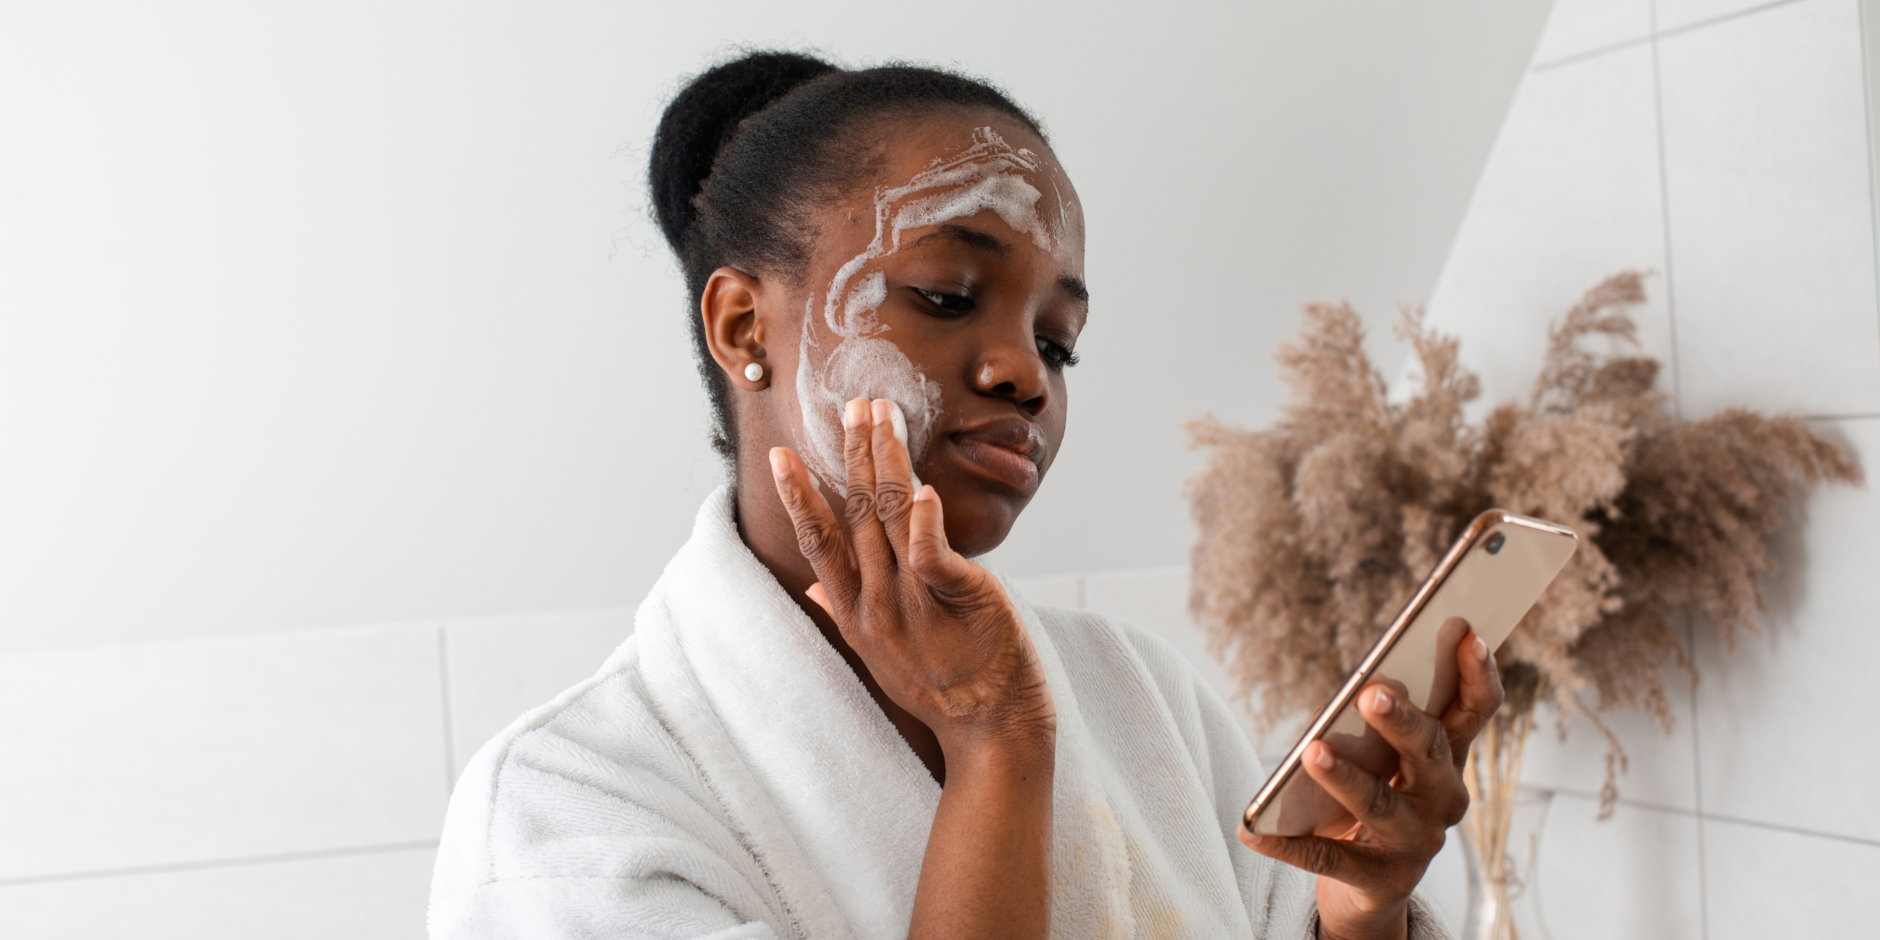 How to layer skincare